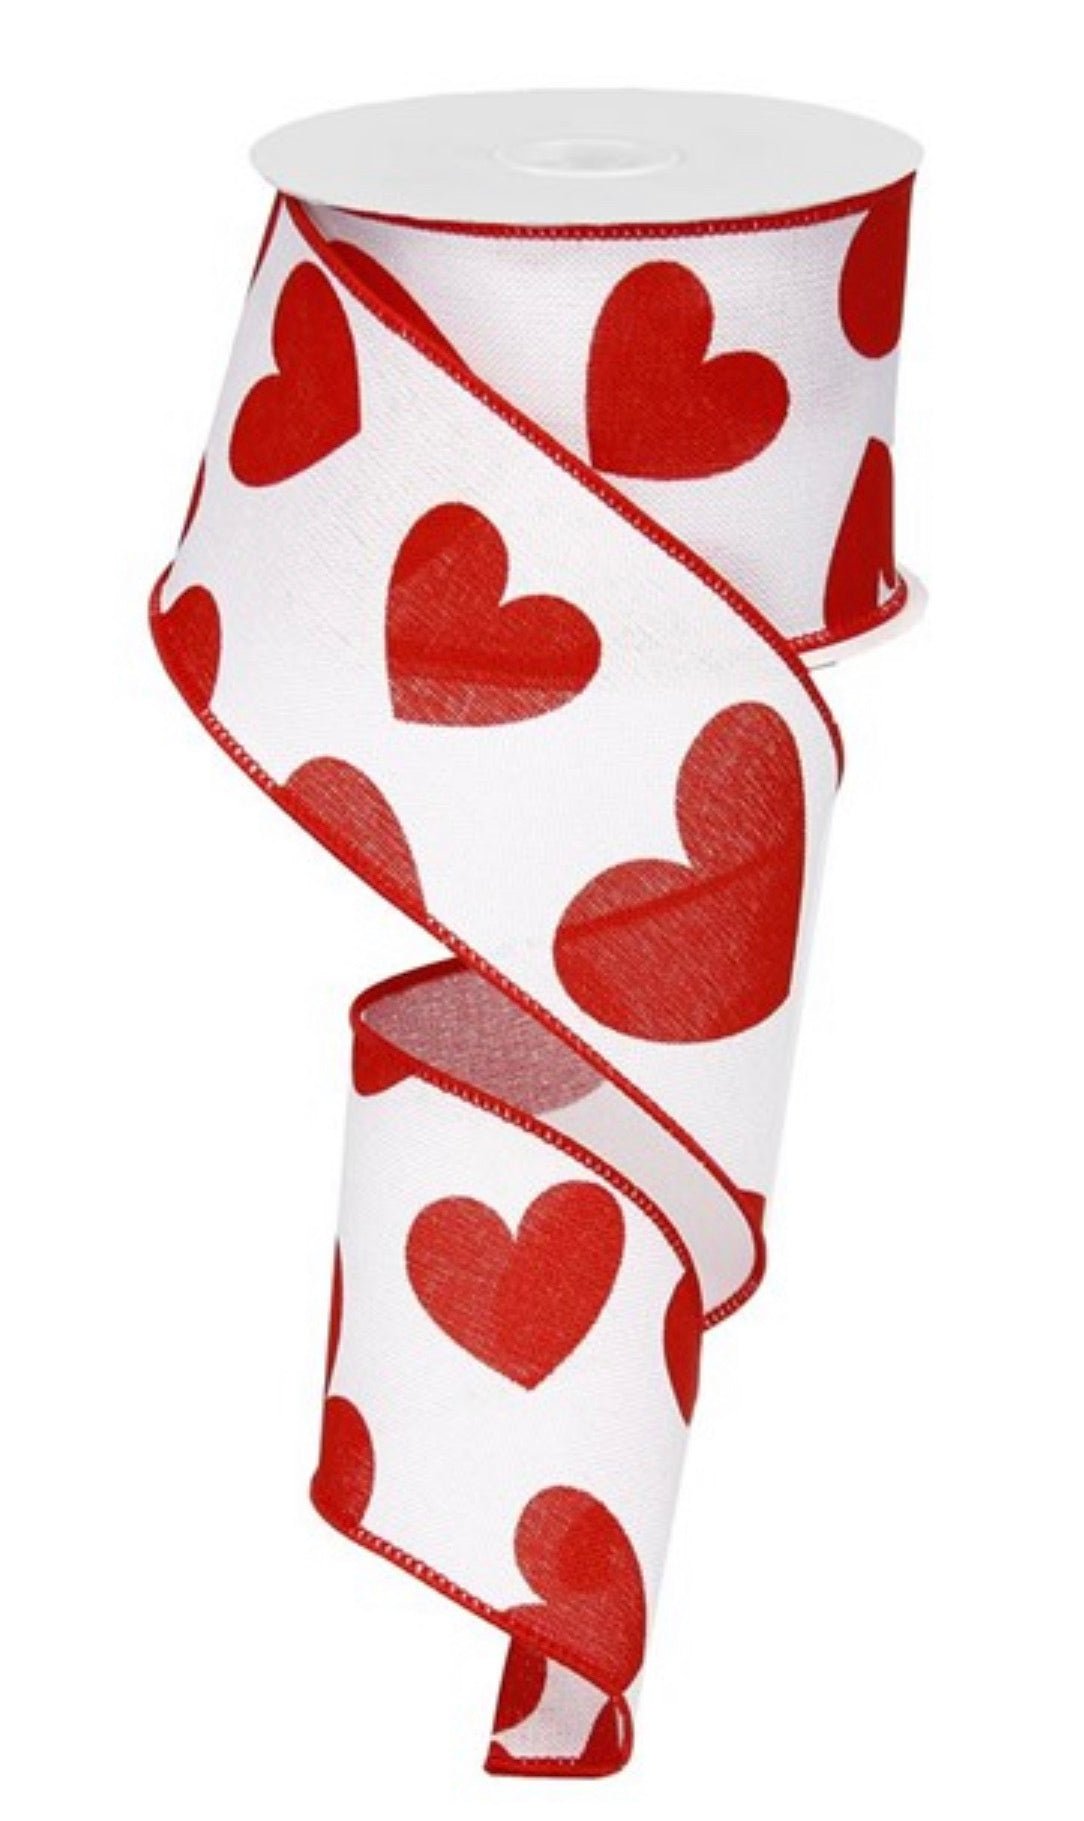 red and white, large heart wired ribbon - Greenery Marketwired ribbonRG0121367